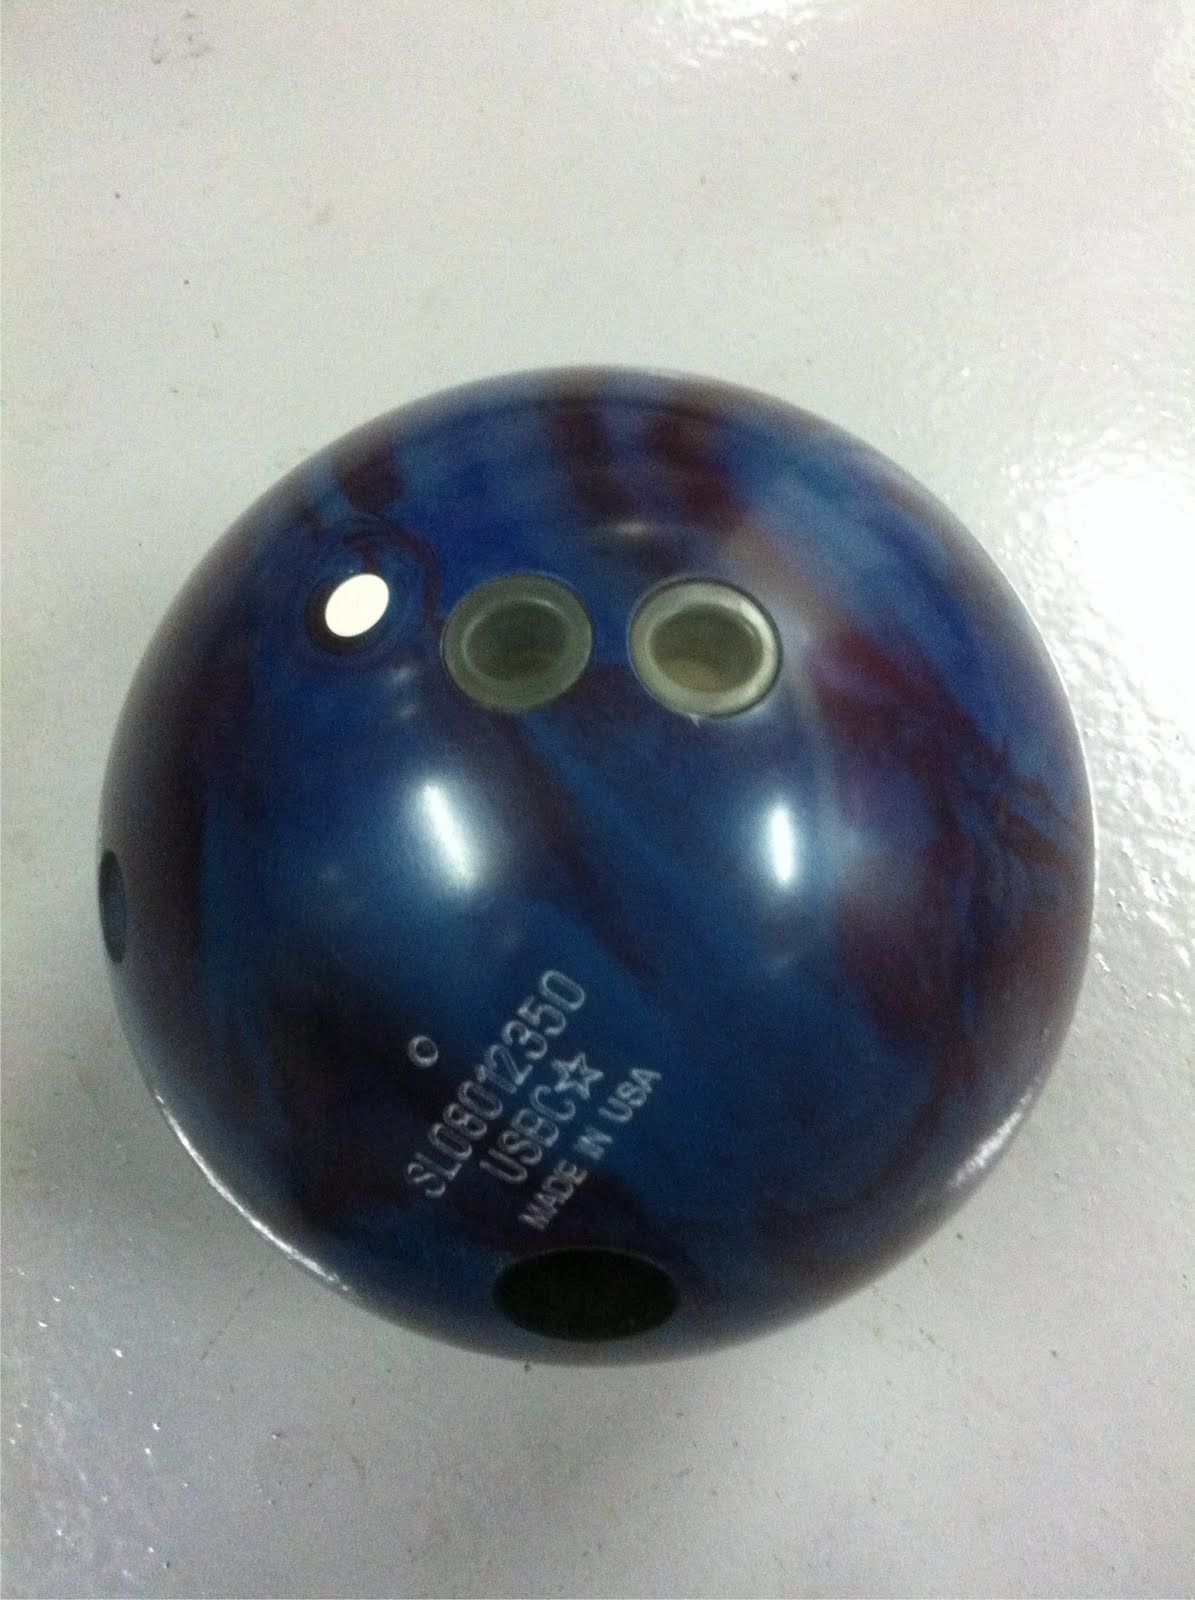 Storm is my name and bowling is my game: Visionary Bowling Balls